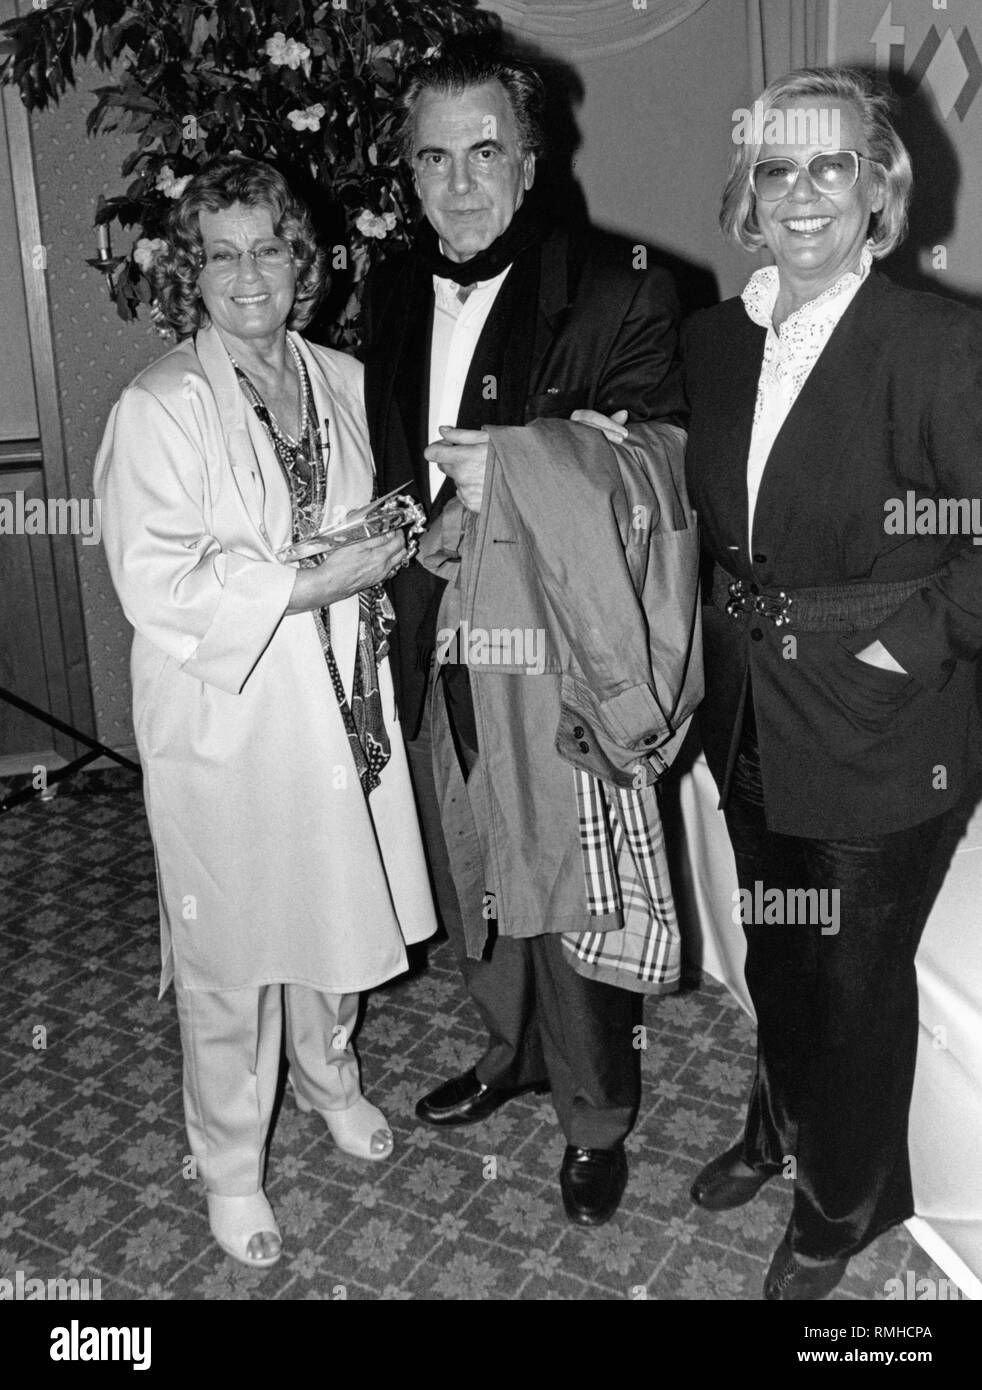 Immy Schell, Maximilian Schell and Maria Schell (from right) in Munich. Stock Photo